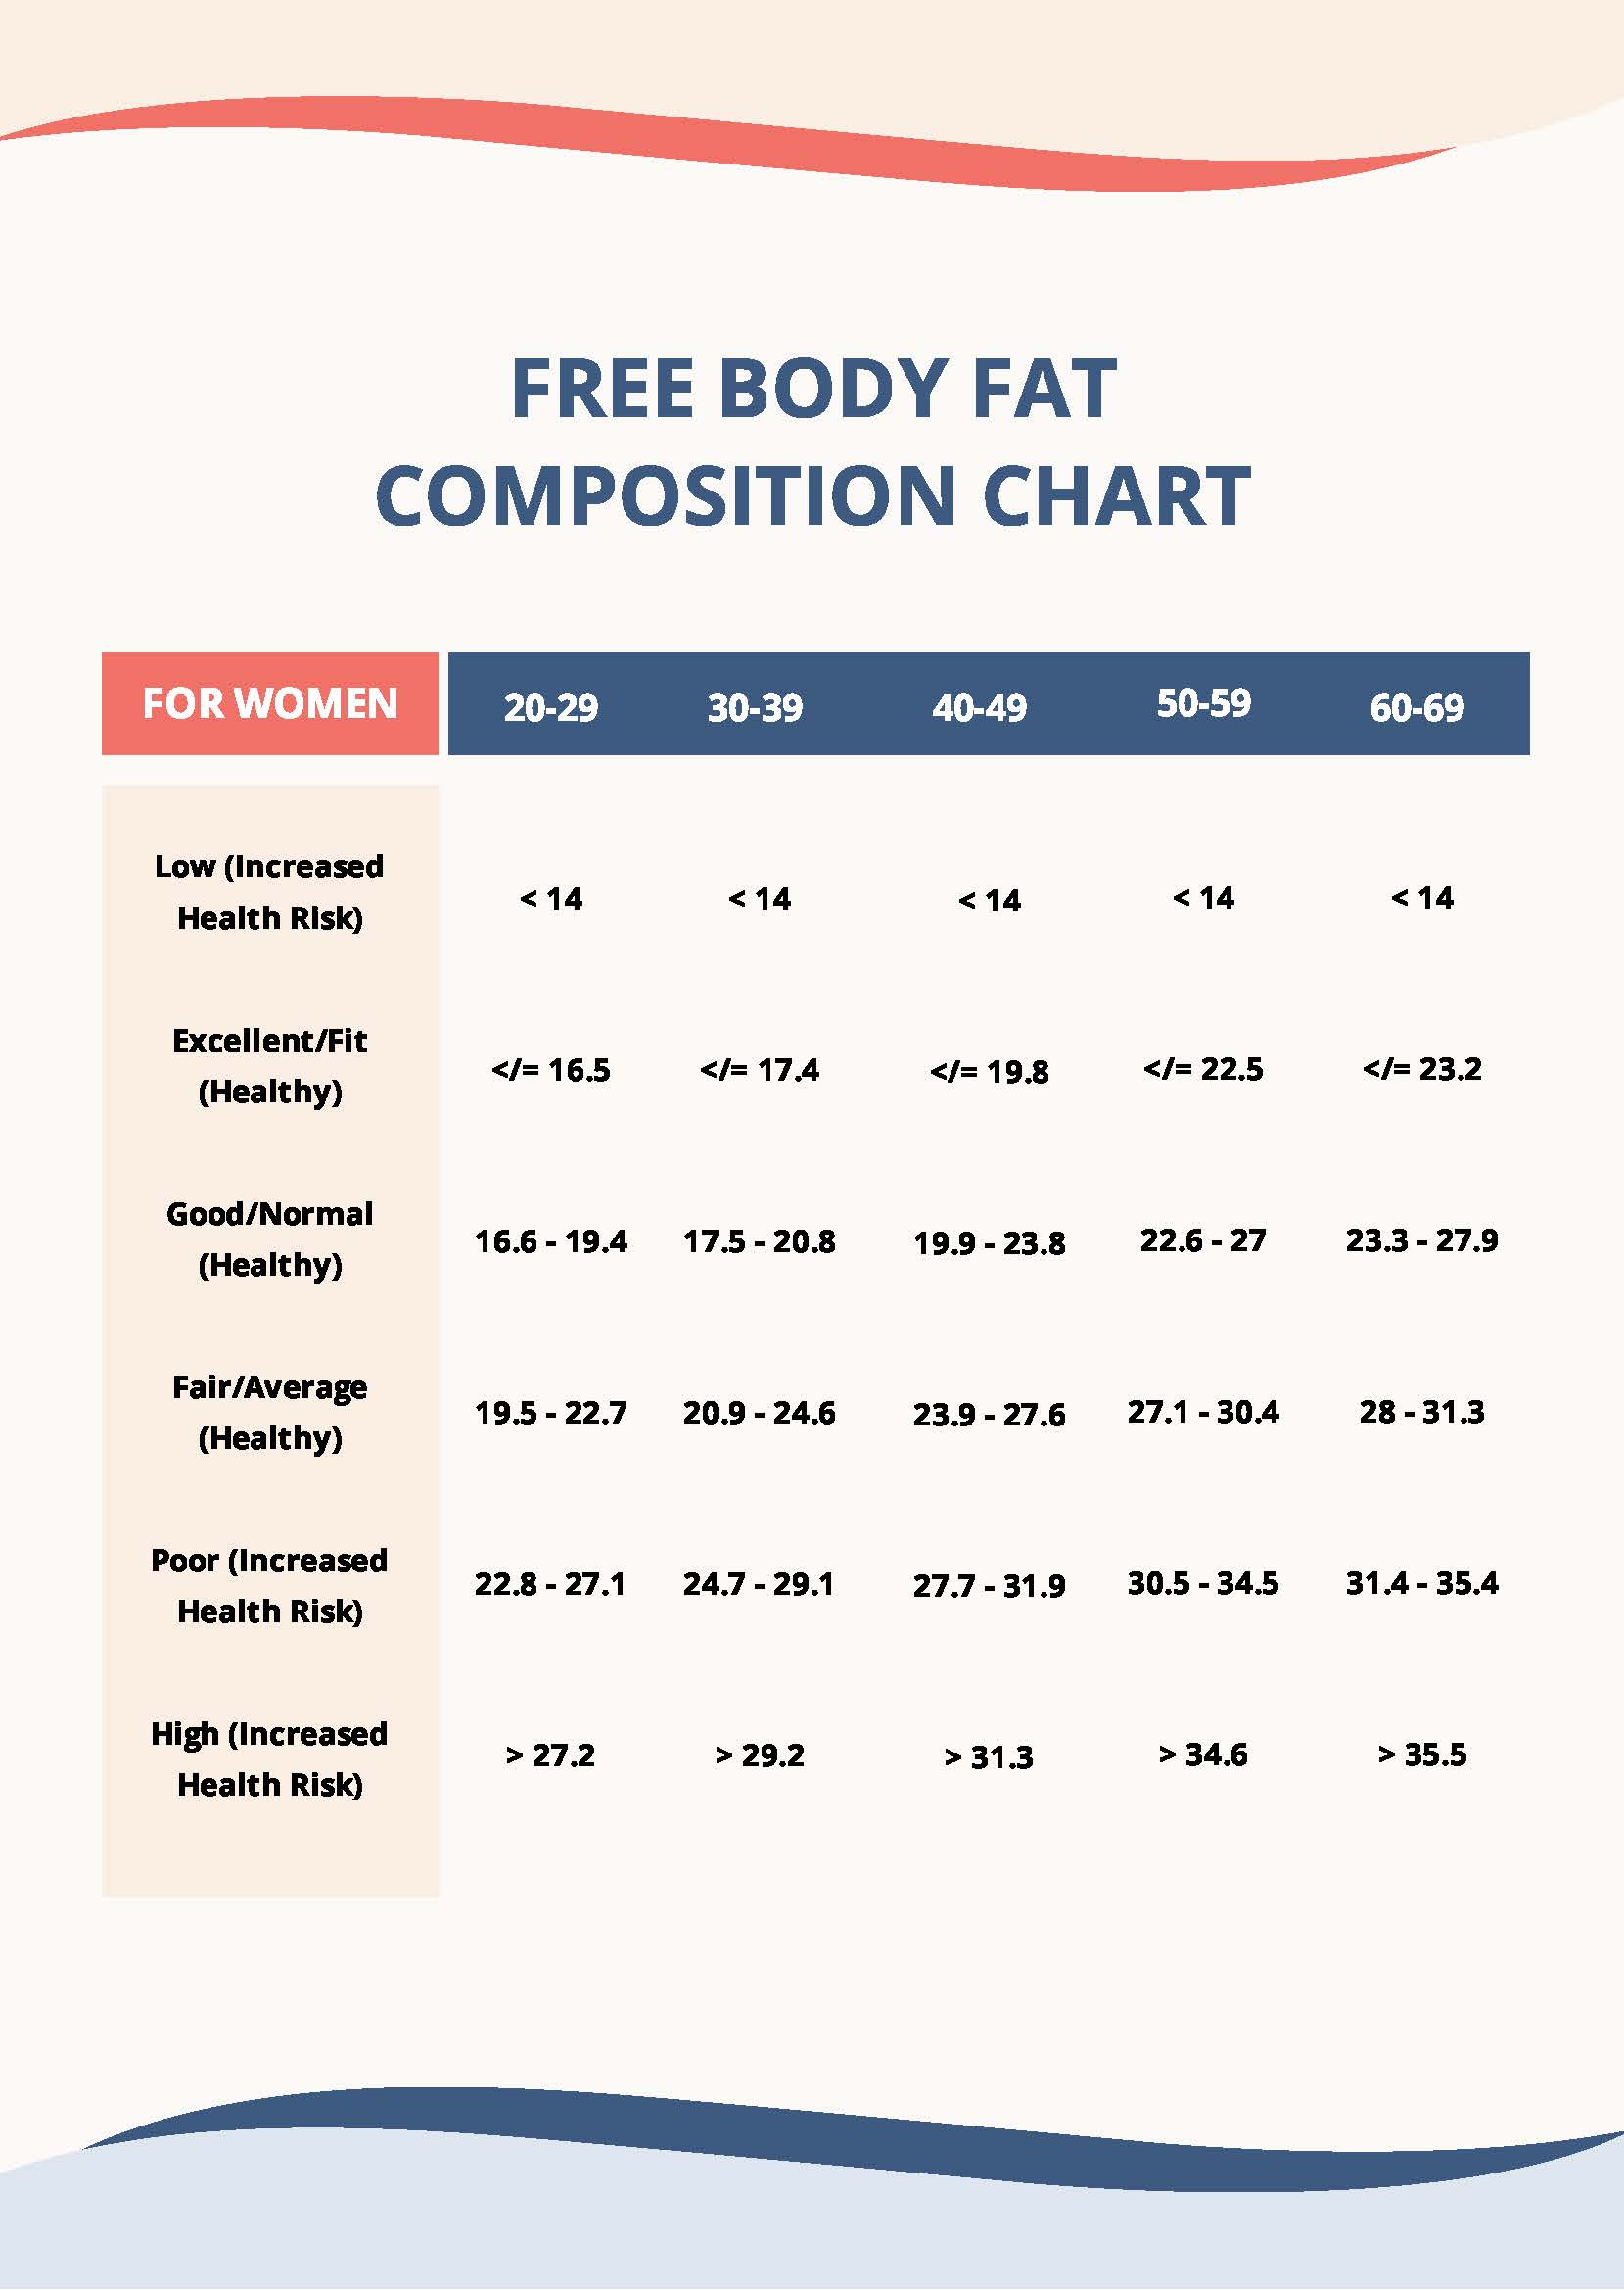 Body Fat Composition Chart in PDF - Download